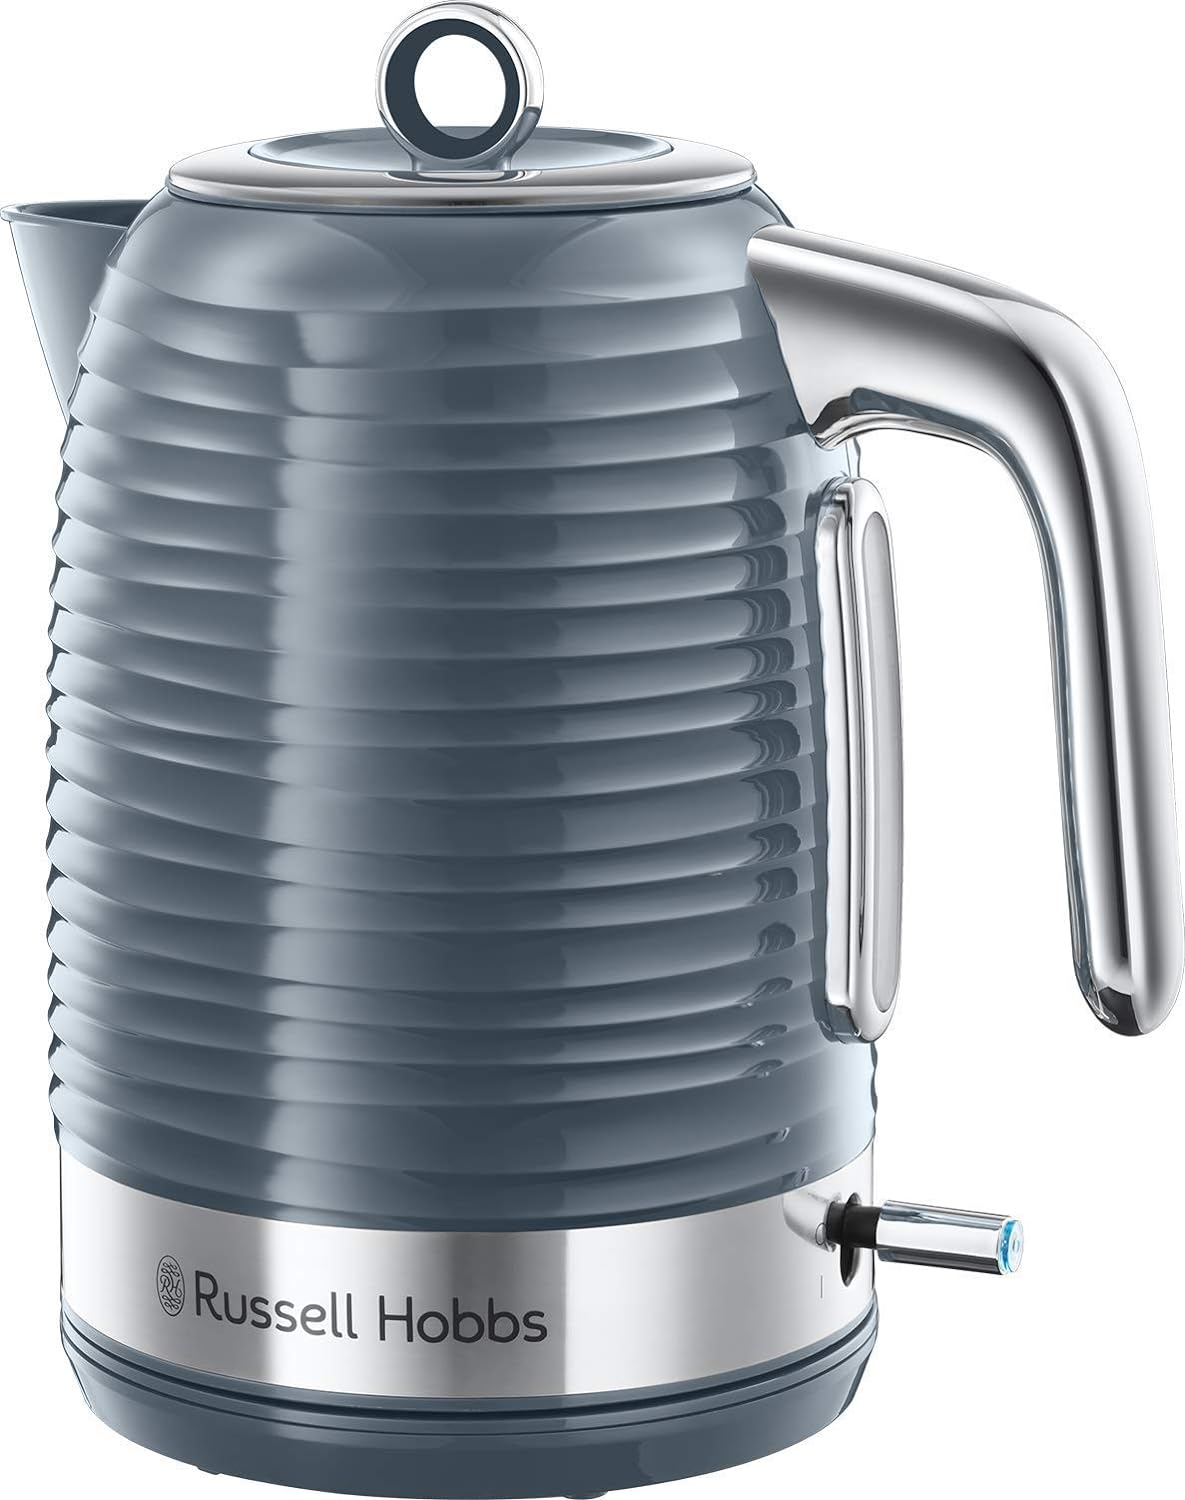 Russell Hobbs Inspire Electric 1.7L Cordless Kettle (Fast Boil 3KW, Cream premium textured plastic, high gloss finish, Removable washable anti - scale filter, Pull off lid, Perfect pour spout) 24364 - Amazing Gadgets Outlet